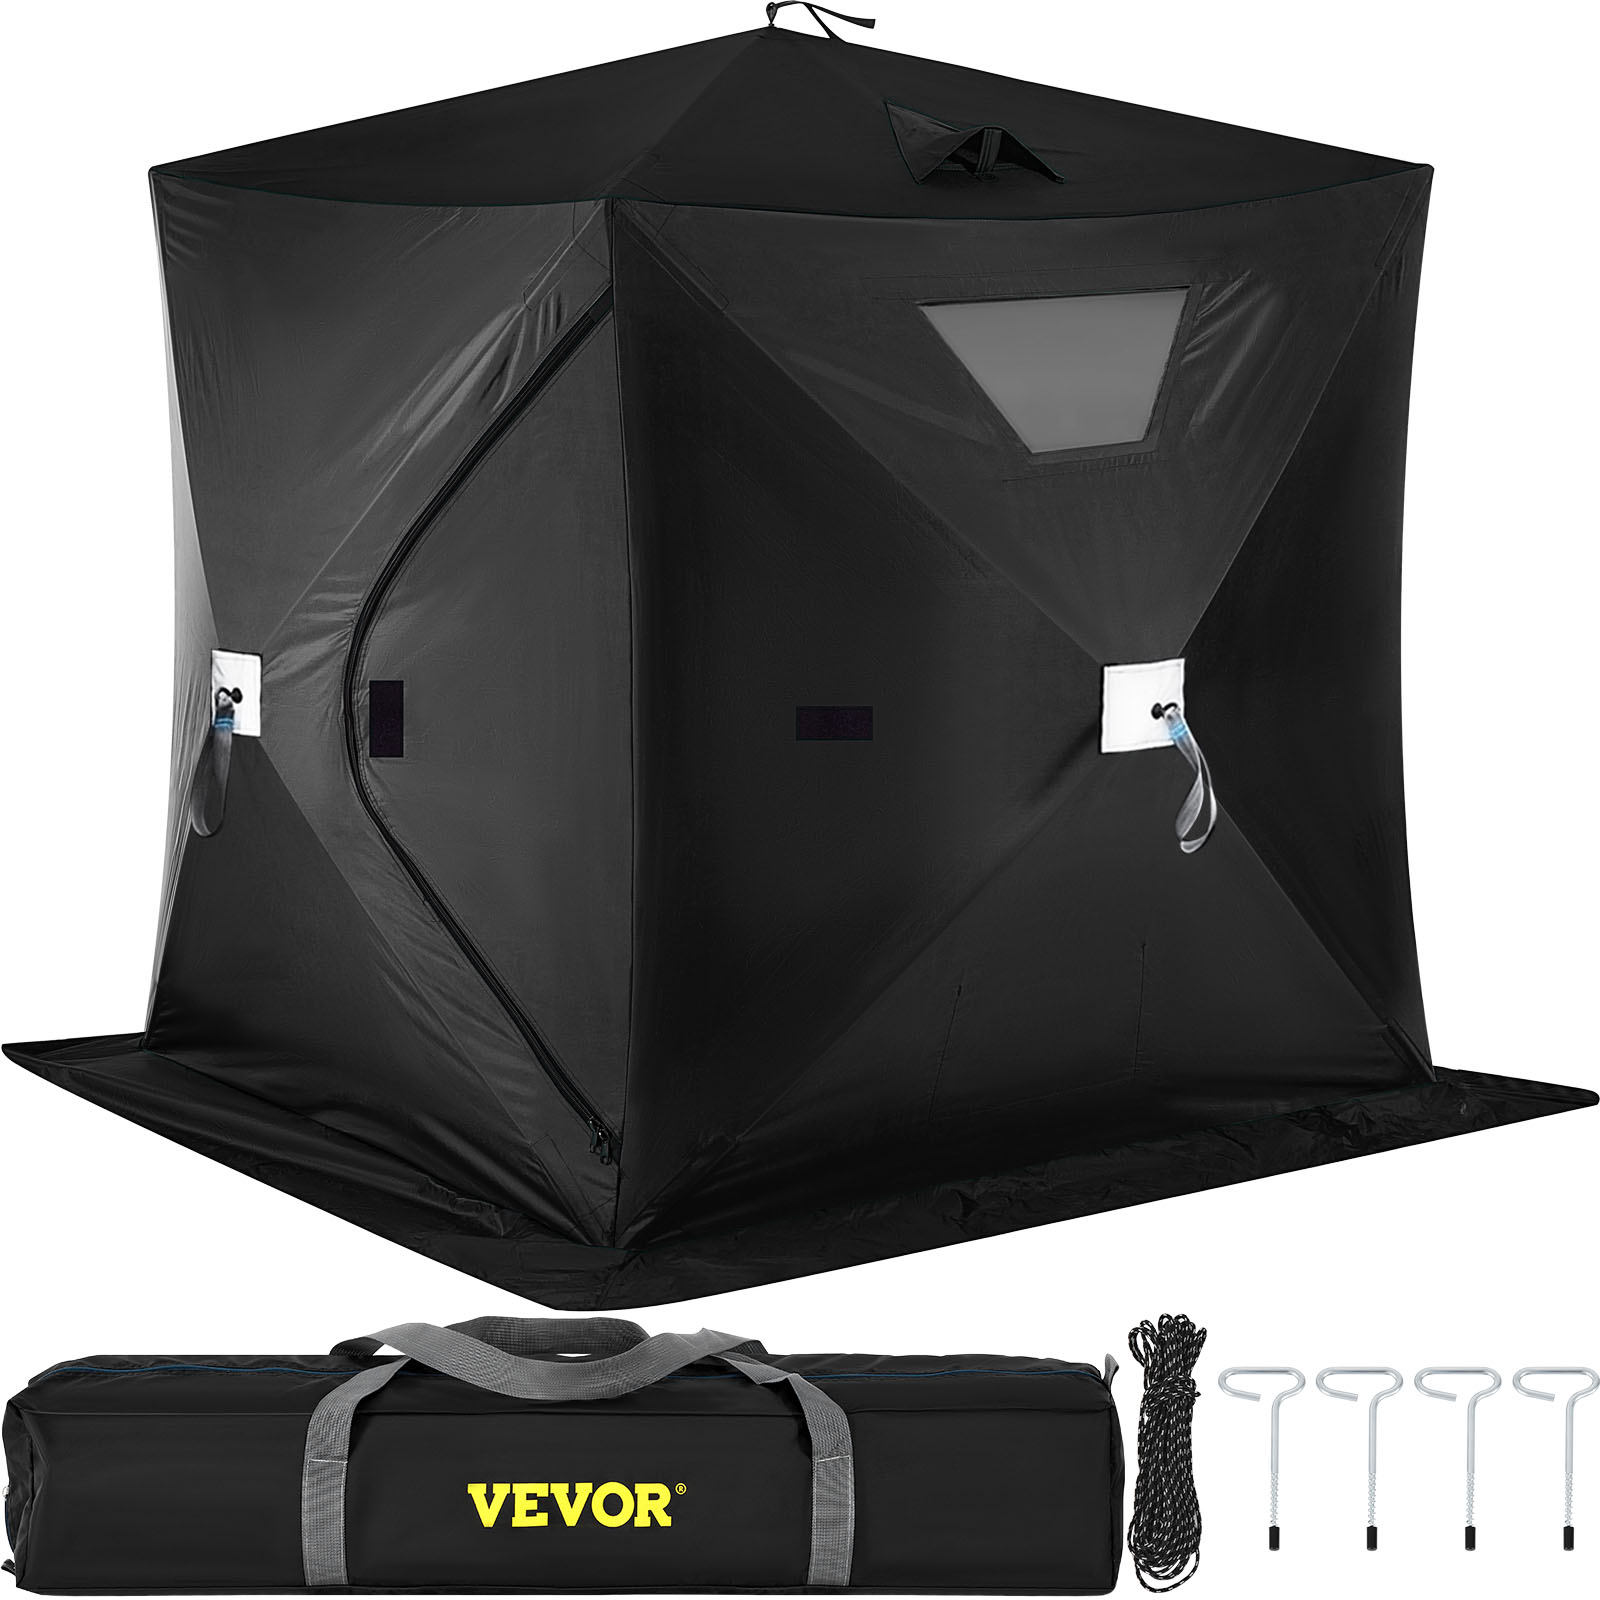 Vevorbrand Ice Fishing Shelter Tent, 2 Person 300 D Oxford Fabric Portable, Strong Waterproof for Outdoor Fishing, 148 x 148 x 168 cm, Black